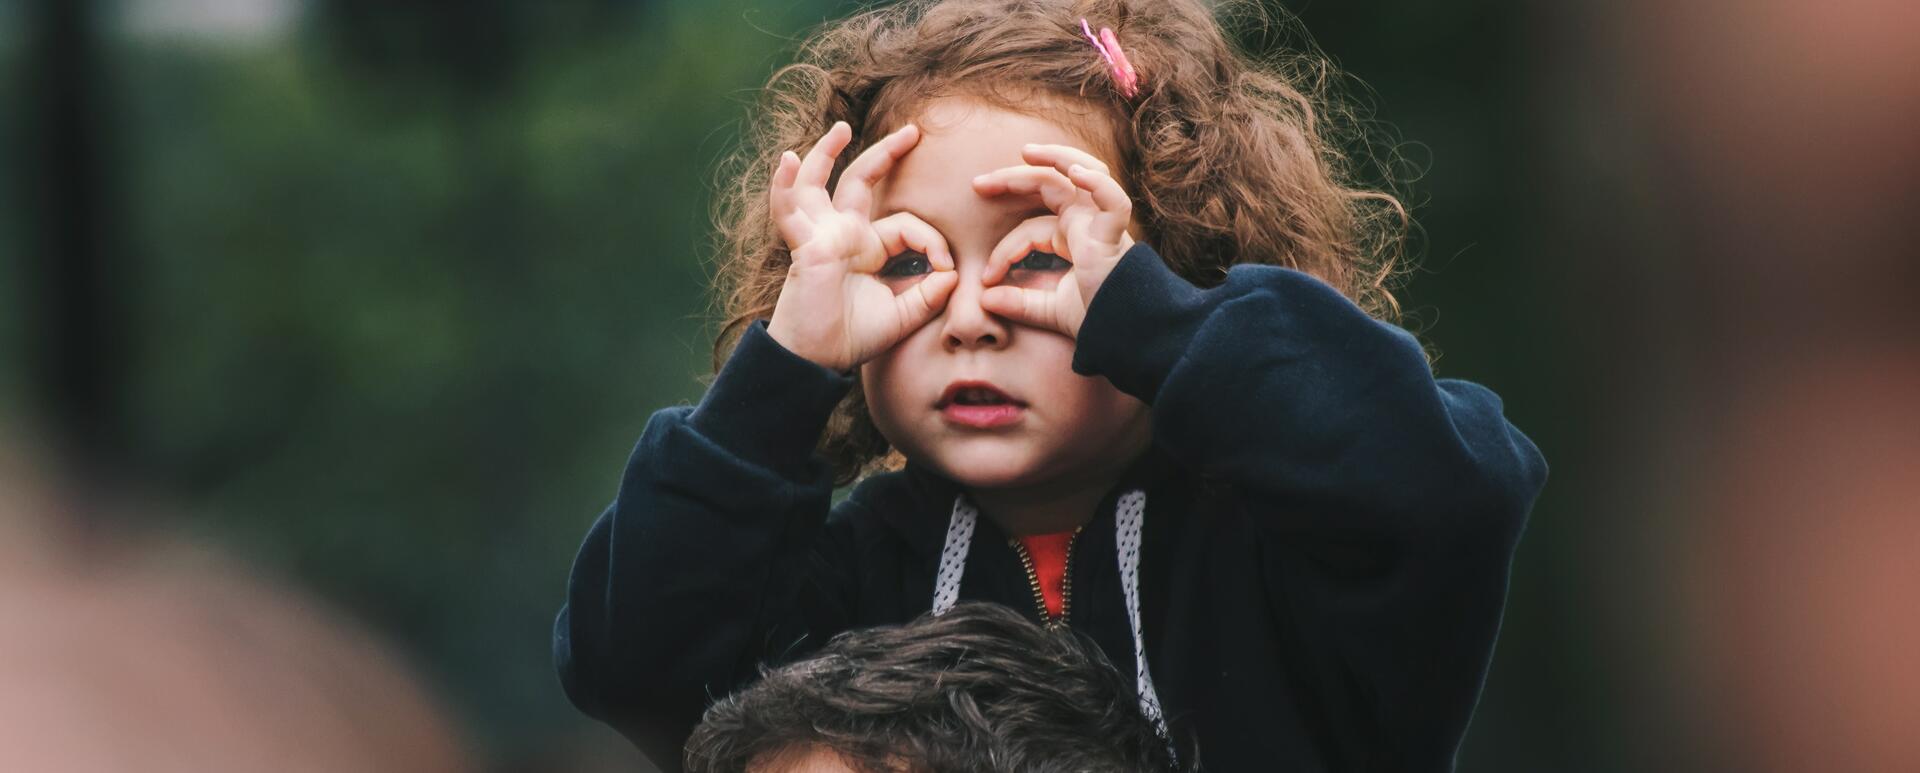 A girl making binocular gesture as in searching for something. Maybe she's looking for your drupal website in google?